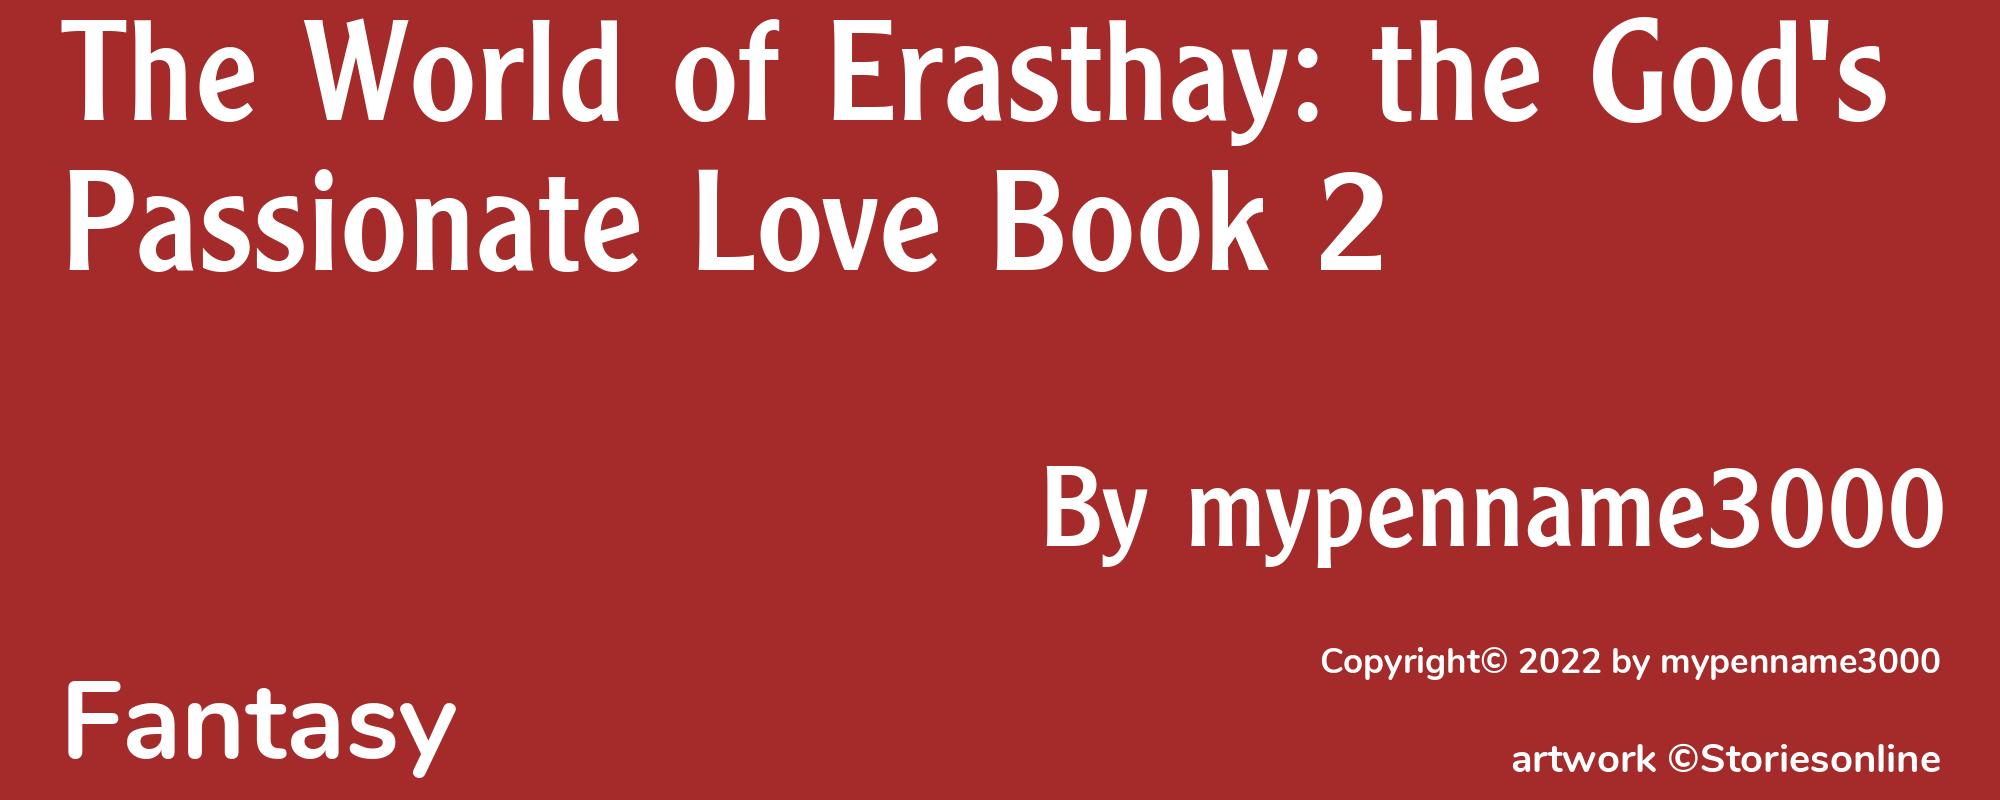 The World of Erasthay: the God's Passionate Love Book 2 - Cover